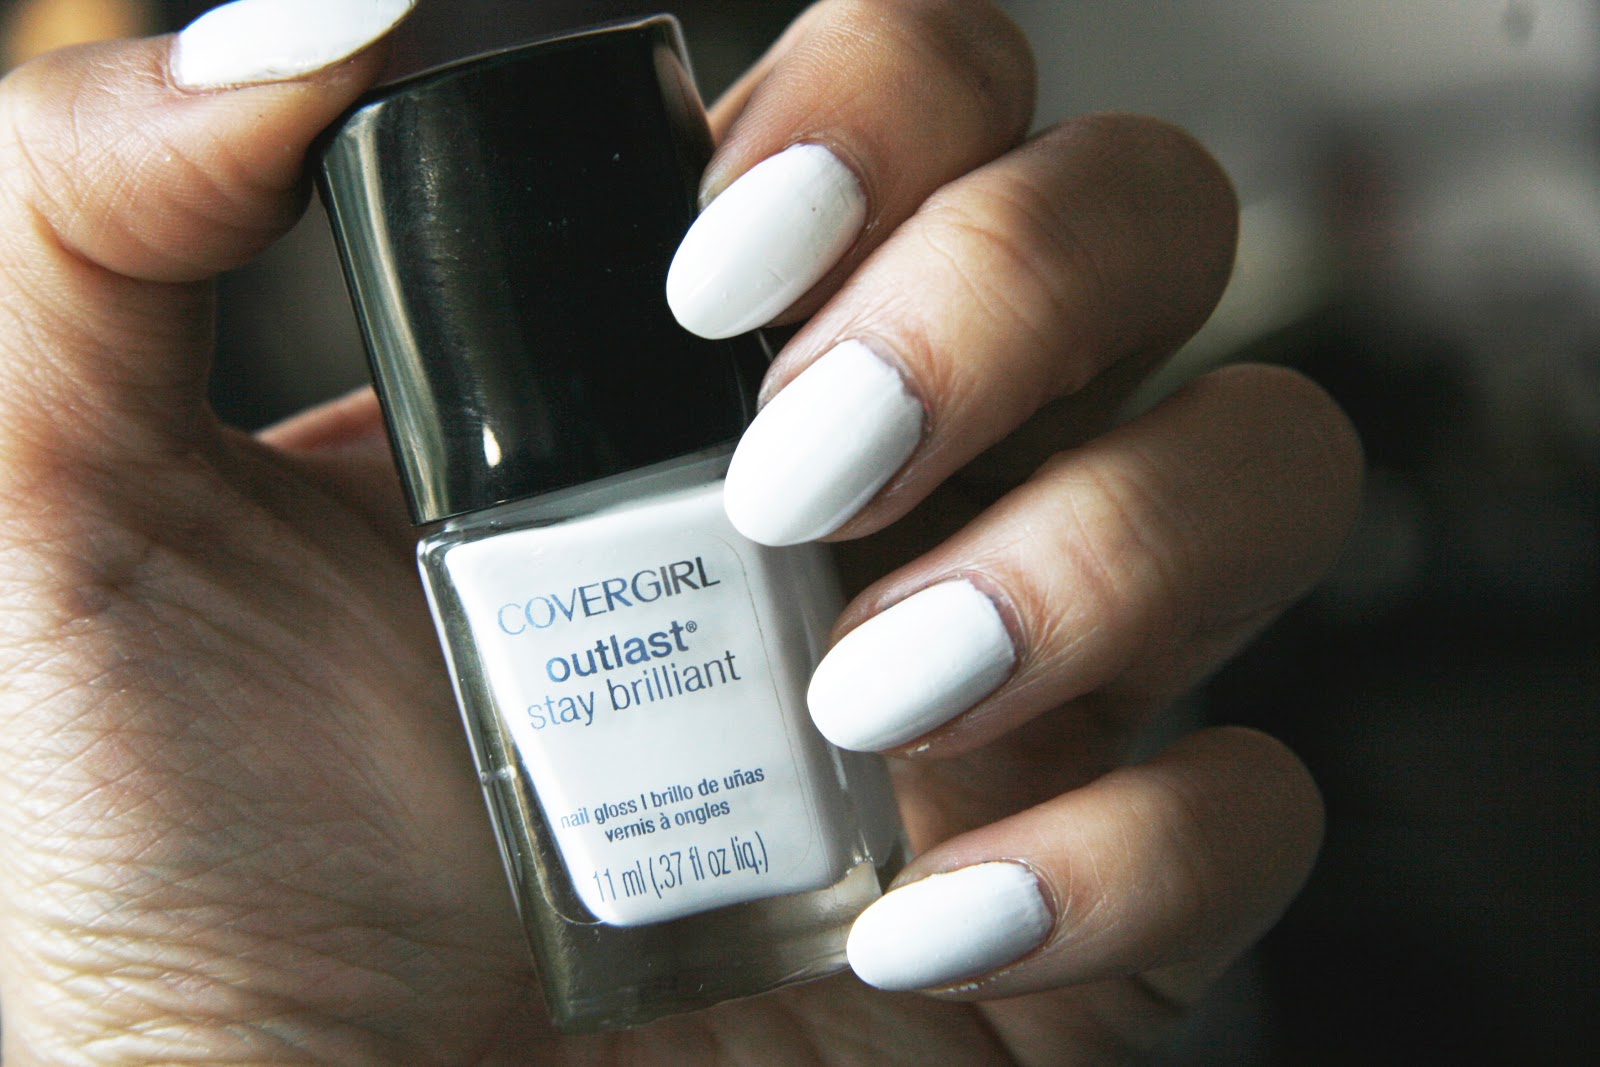 9. Covergirl Outlast Stay Brilliant Nail Gloss in "Sunkissed" - wide 1